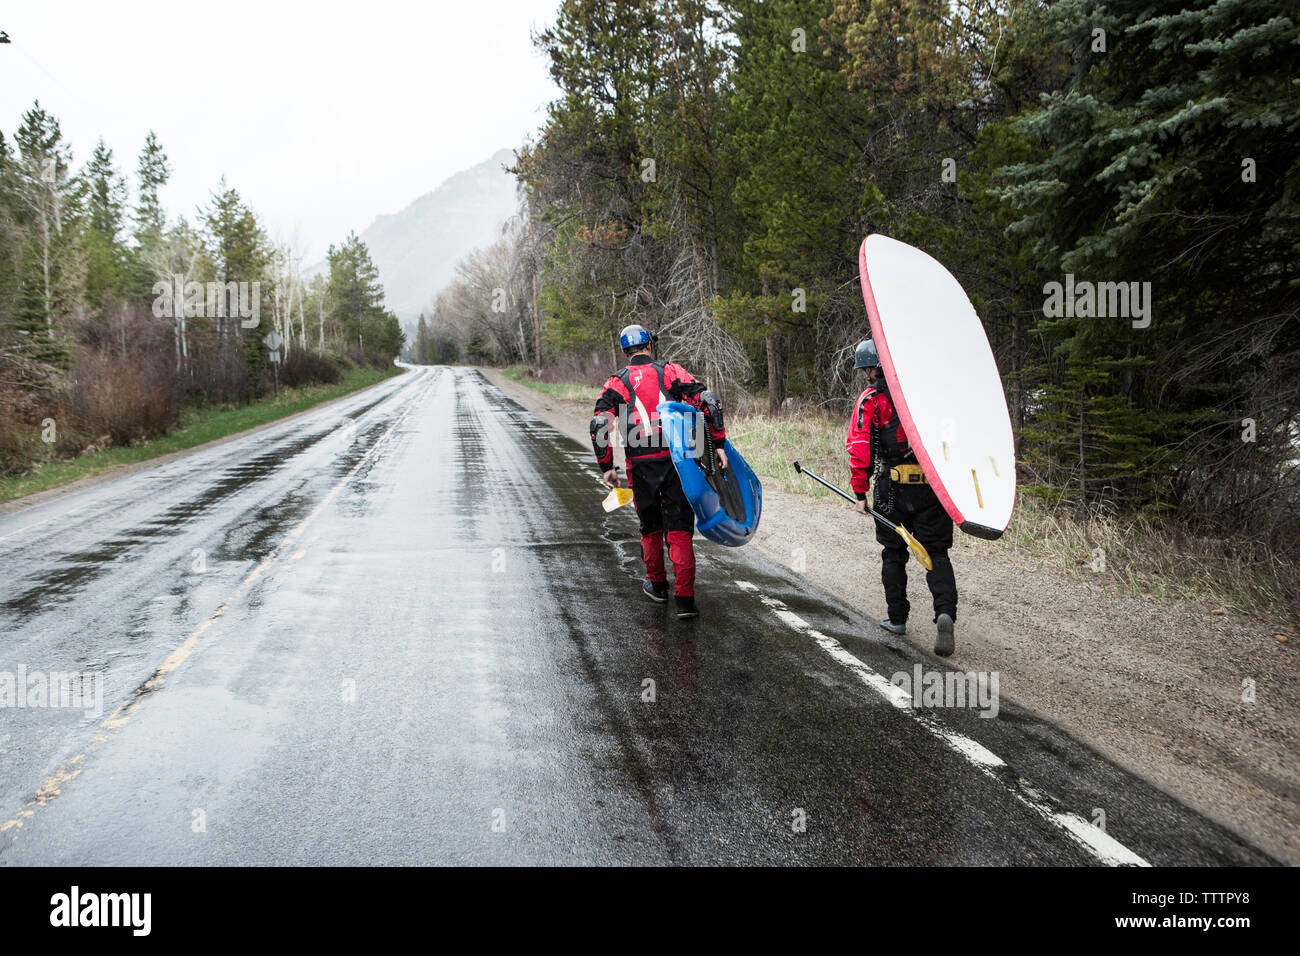 Rear view of paddlers carrying paddleboards while walking on wet road Stock Photo